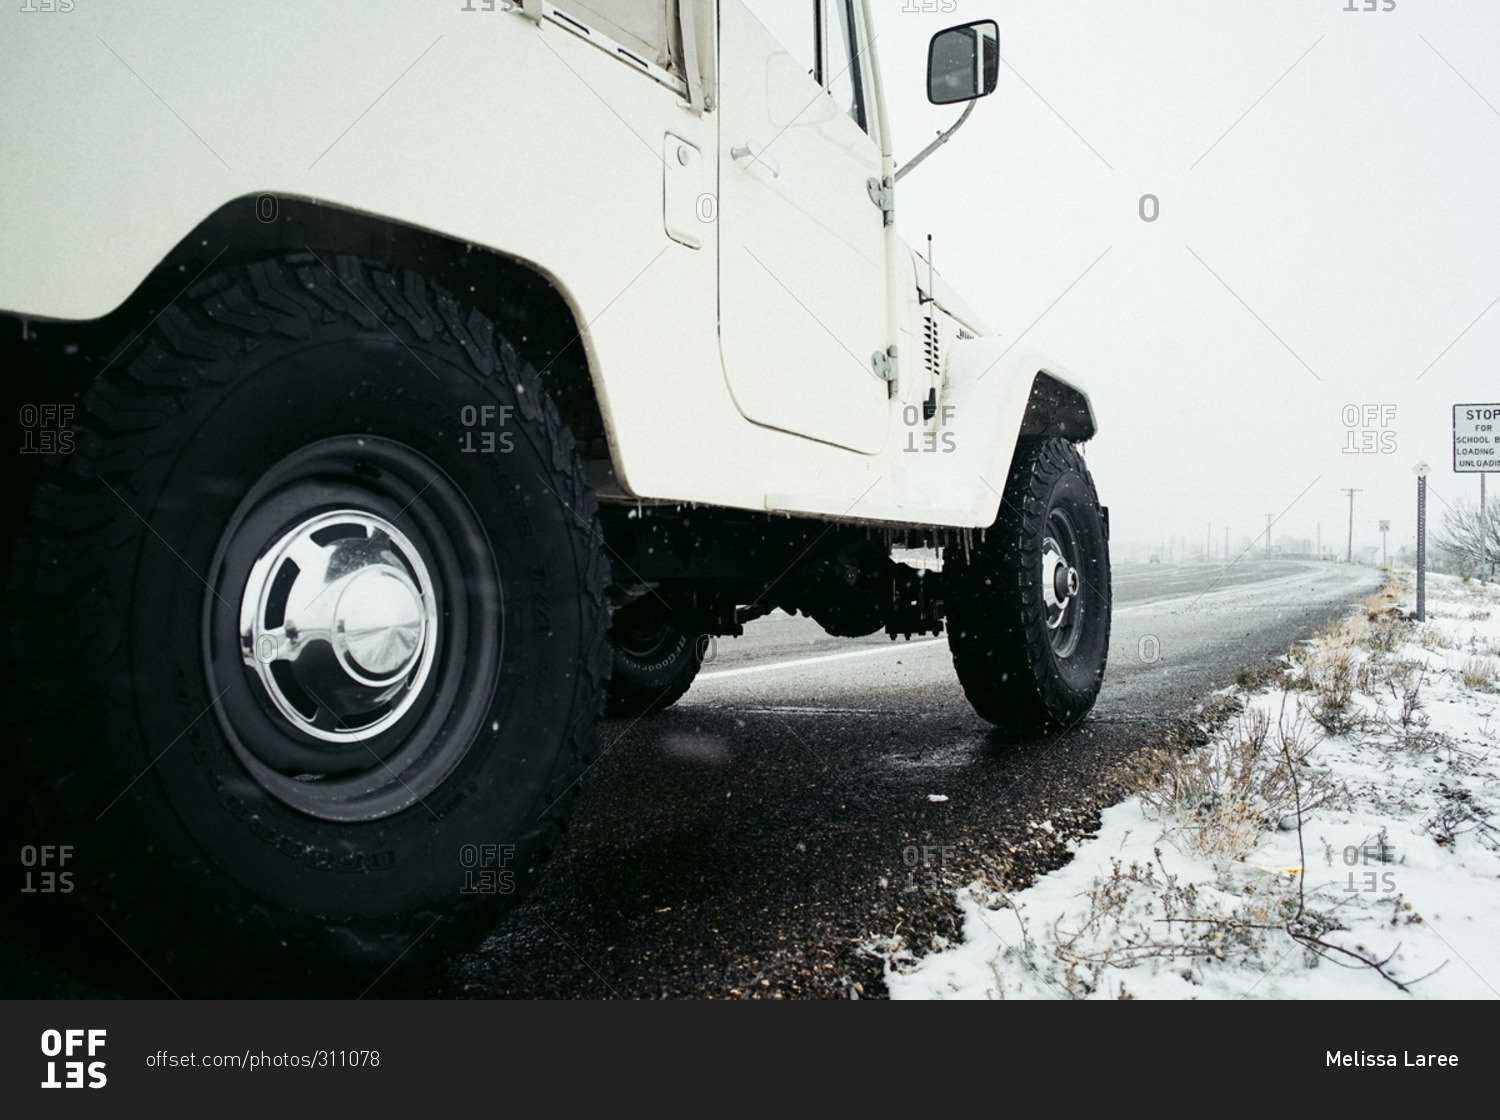 Close-up view of a sports utility vehicle on the side of an icy highway